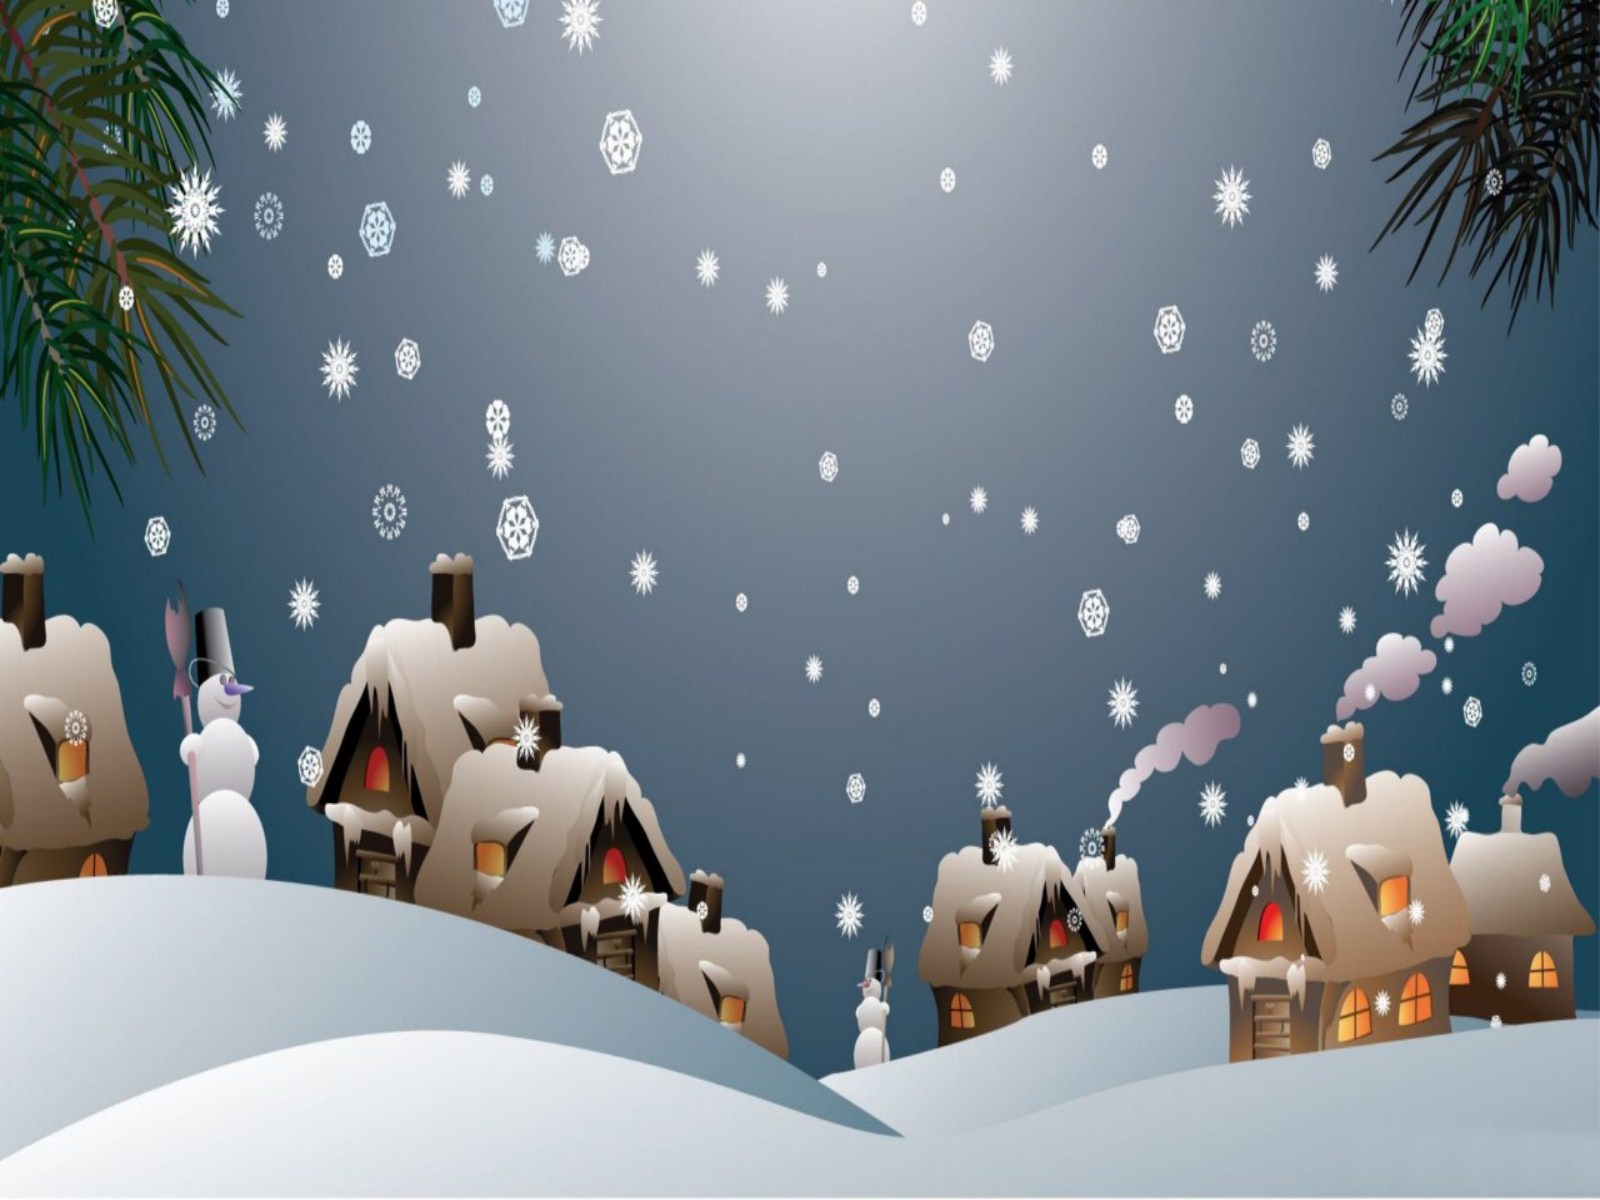 Snowy Christmas Animated Wallpaper Jpeg iPhone And